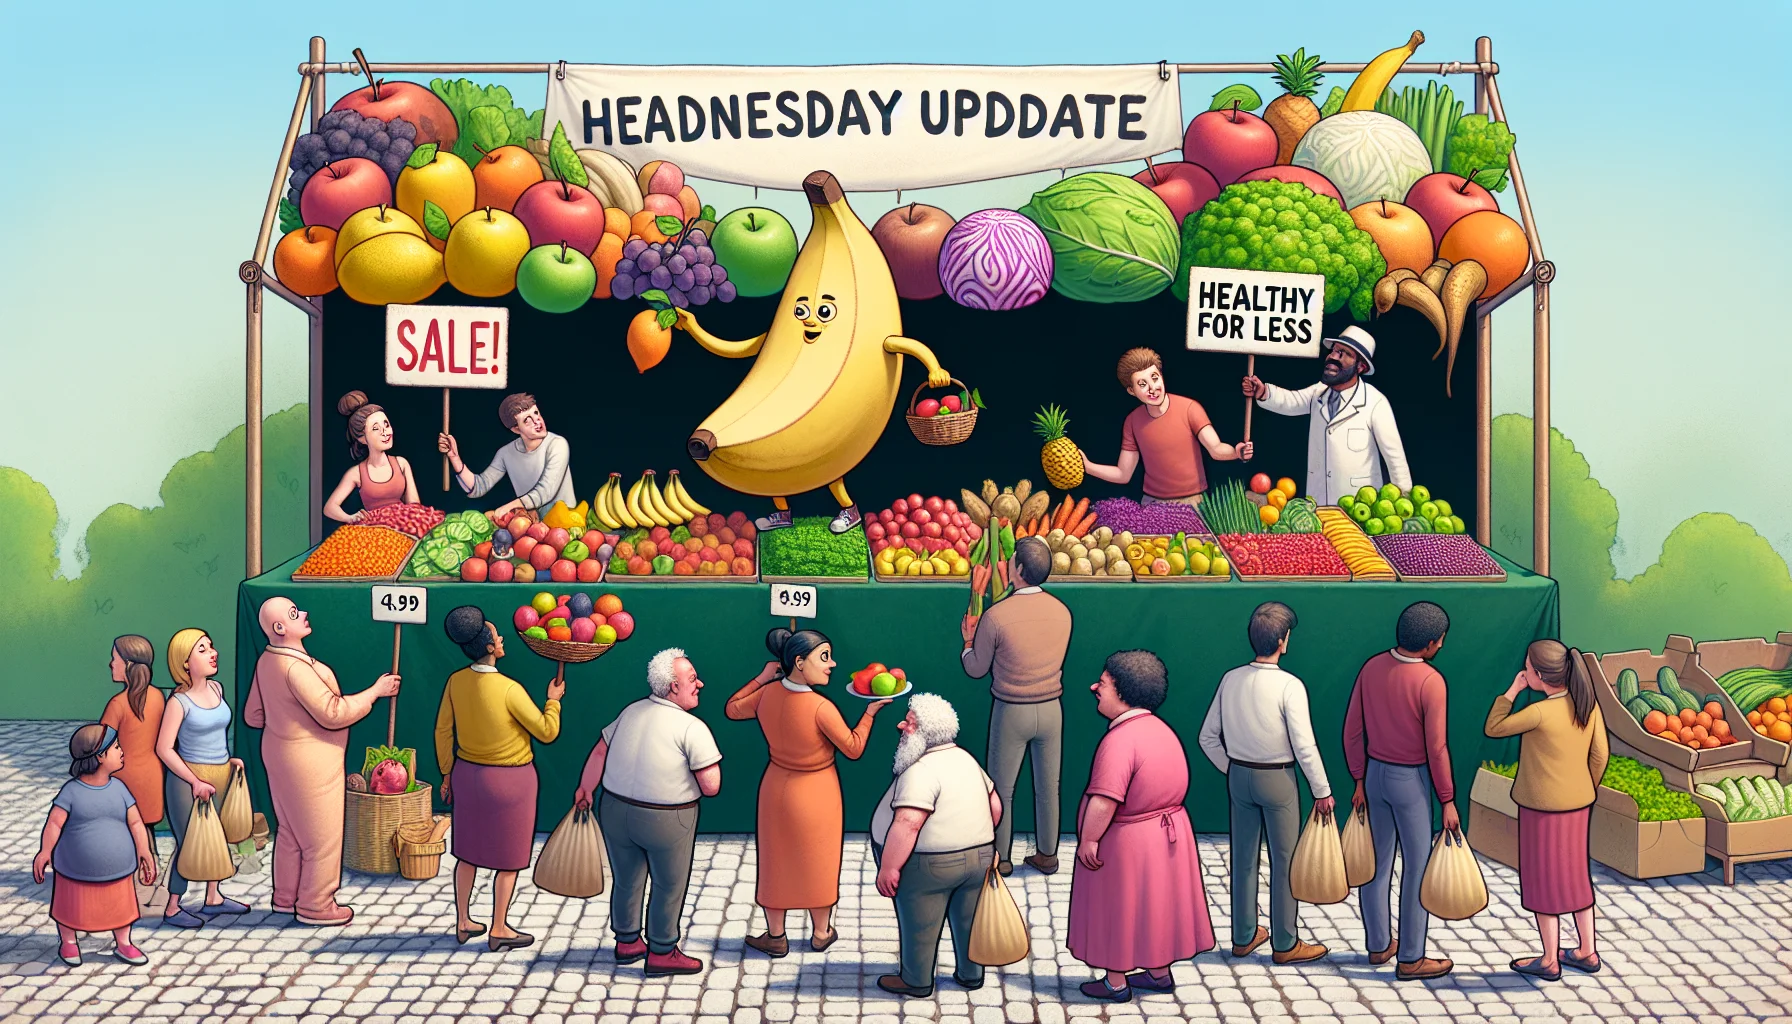 Create an amusing scenario depicting Health-Focused Wednesday Update. Visualize a delicious, colorful and vibrant array of fruits and vegetables at a bustling farmer's market with a large sign displaying 'Sale! Healthy for Less'. Shoppers of various descents such as Caucasian, Hispanic, and Middle-Eastern men and women jovially haggling prices, filling their bags with fresh produce. In the middle, a comical caricature of a stout banana haggling with a skinny apple, as a subtle and fun reminder of the importance of a balanced diet.